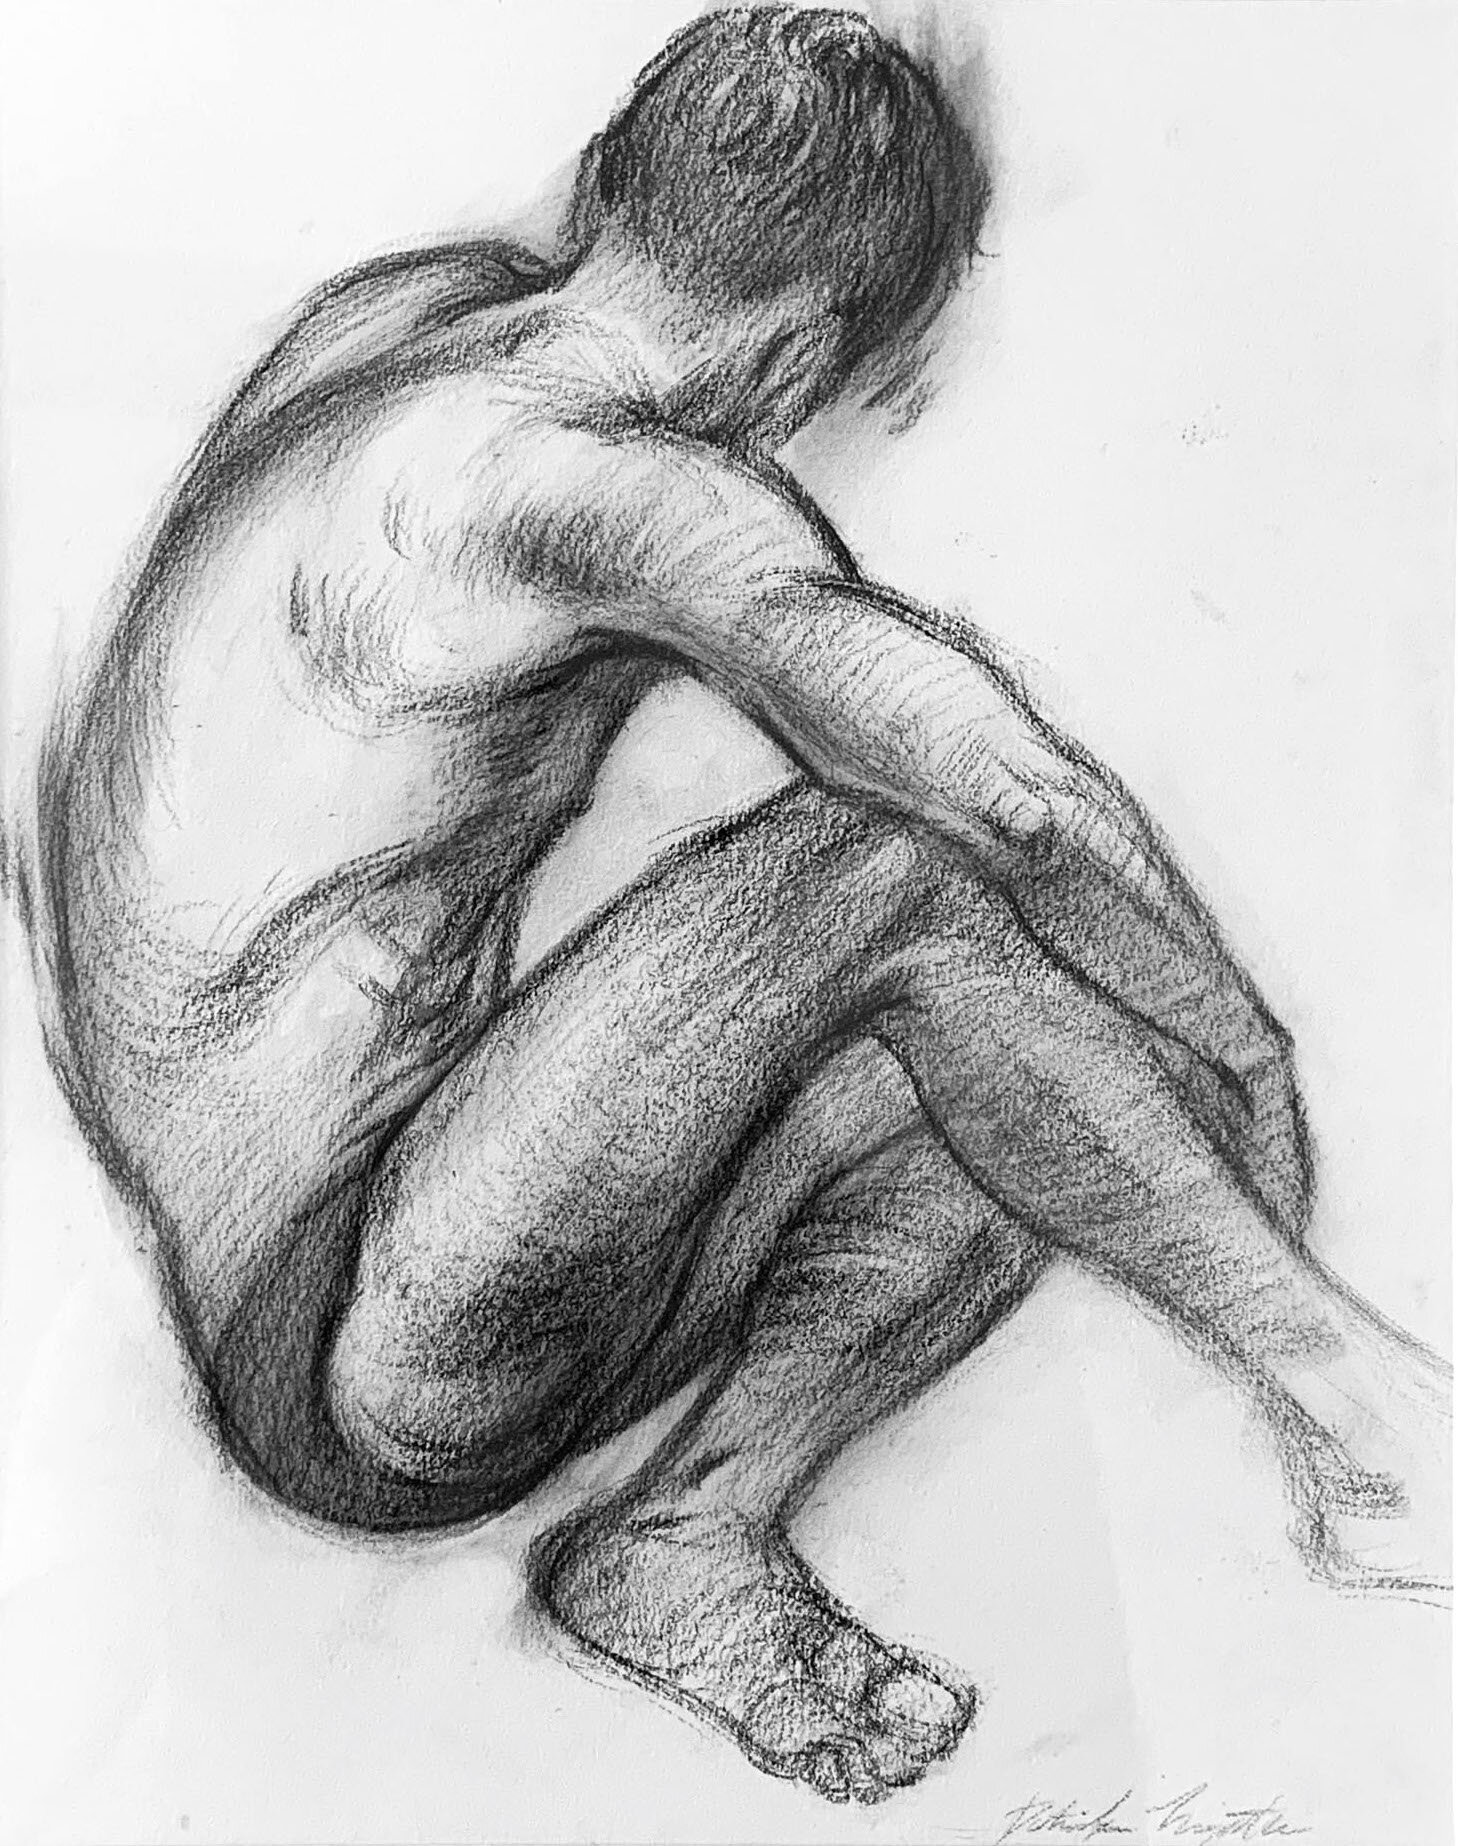  Waiting. 2019, 9”x12”, Charcoal on paper  